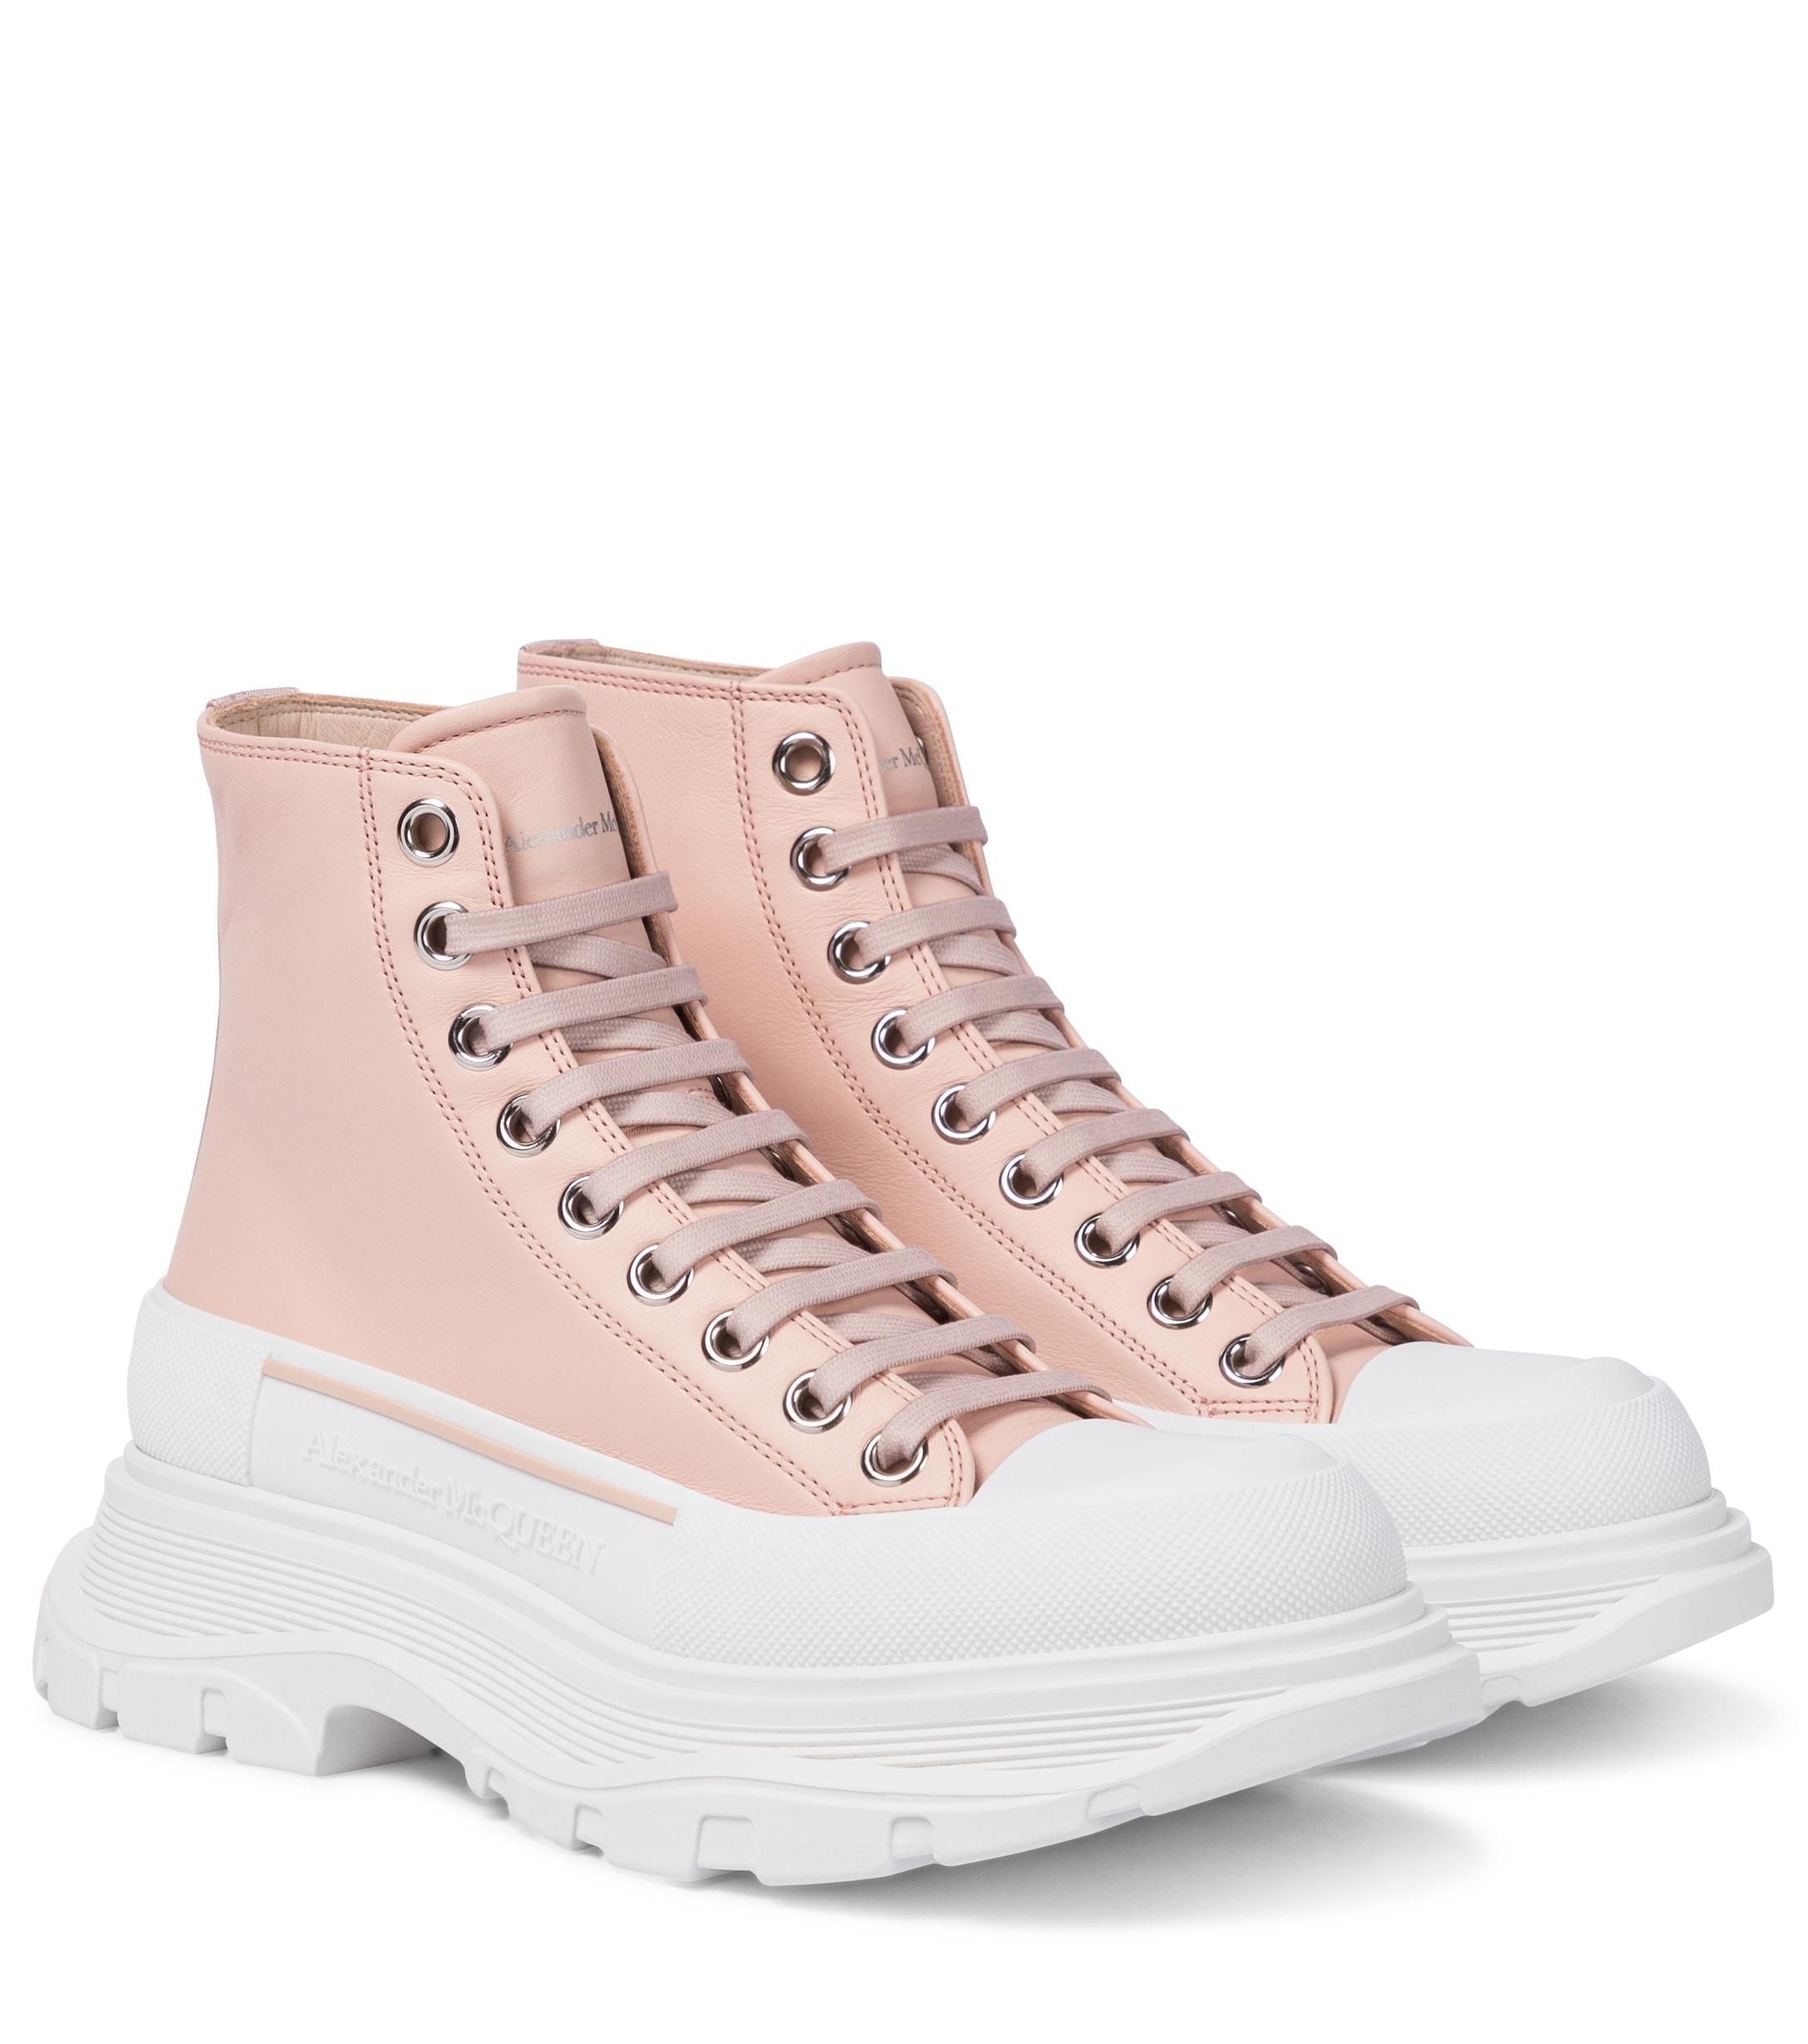 Alexander McQueen Tread Slick Leather Ankle Boots in Pink - Lyst